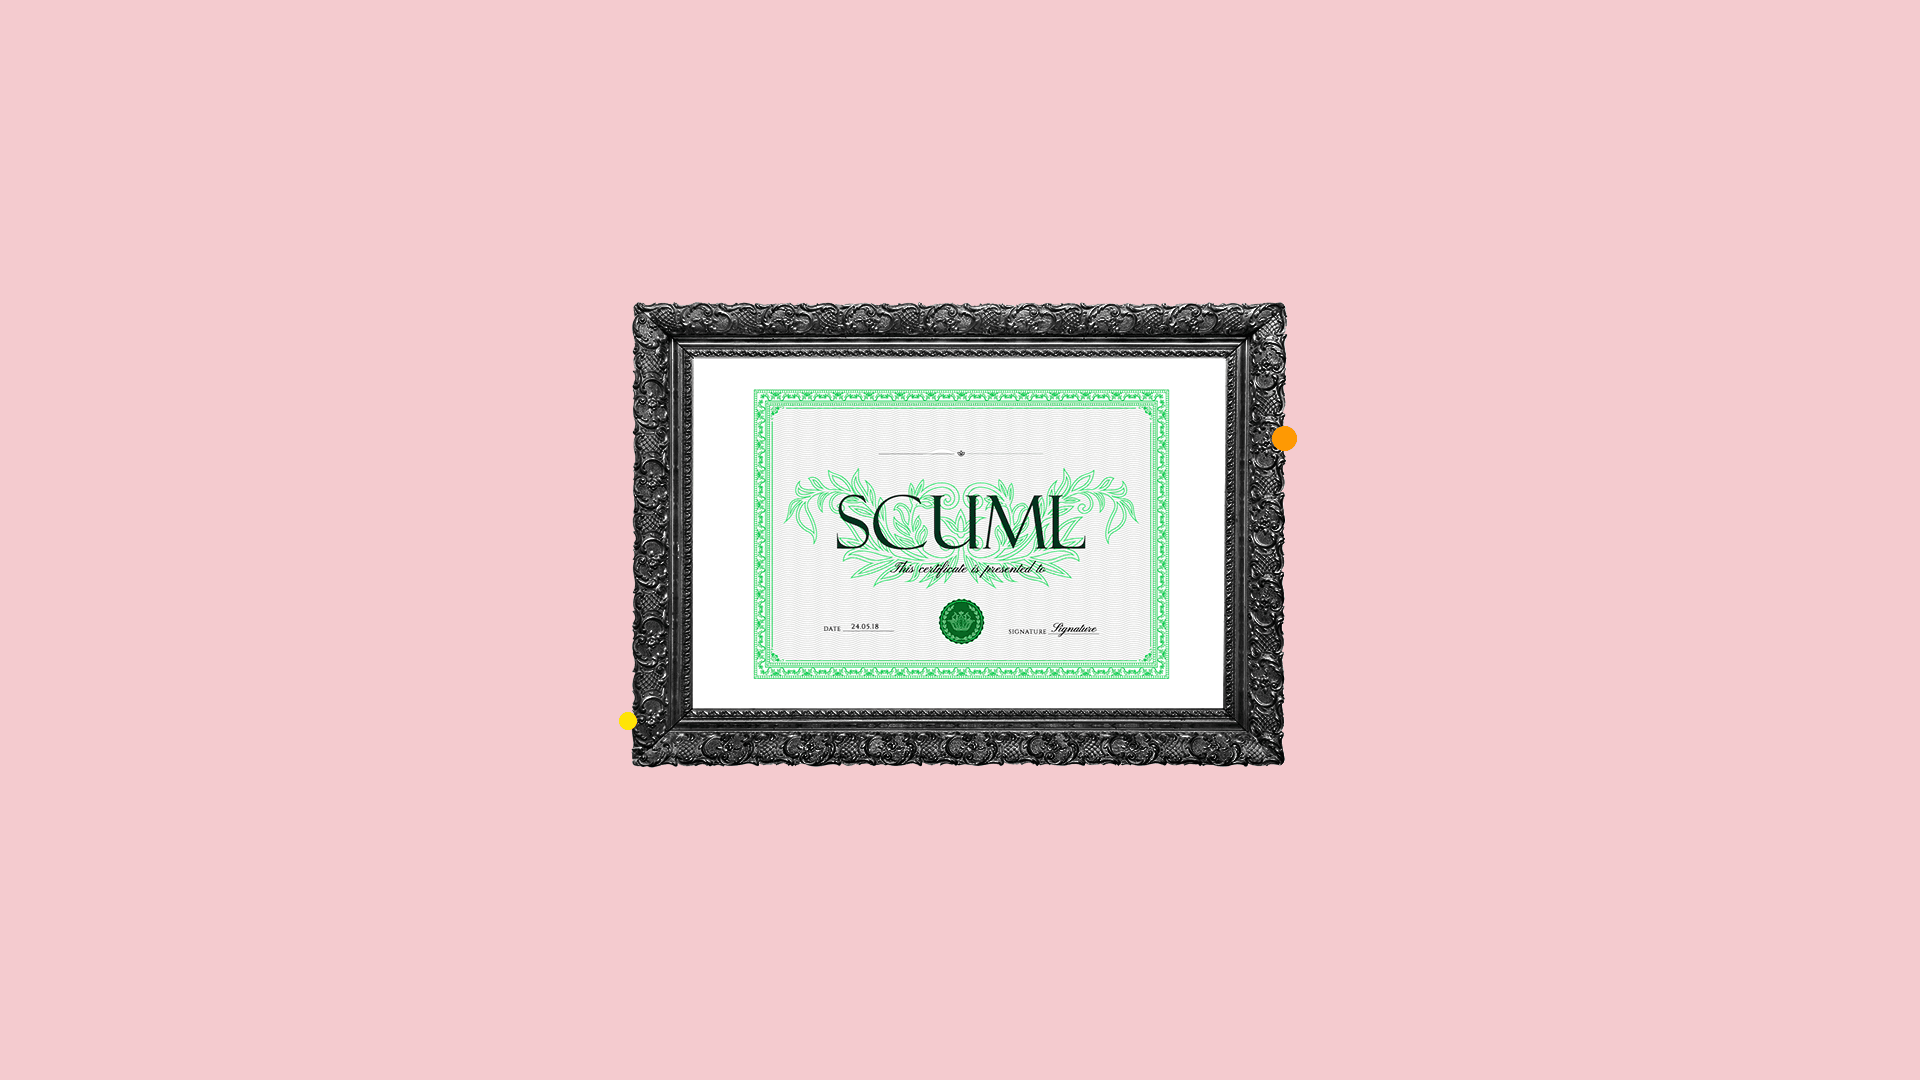 What is a SCUML Certificate and how do I get one?